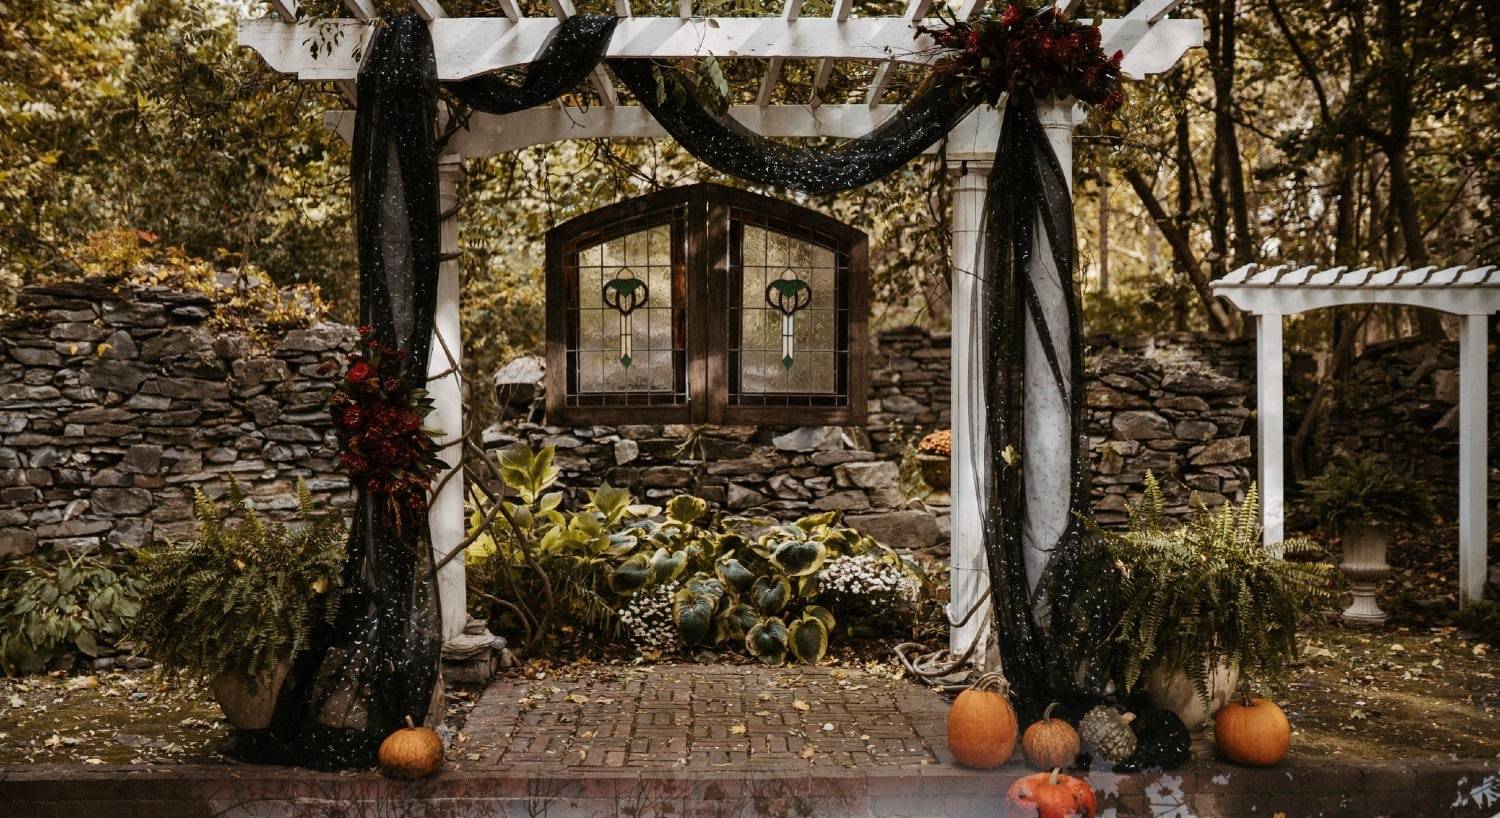 A gorgeous white pergola decorated for a fall wedding against a large stone wall surrounded by trees